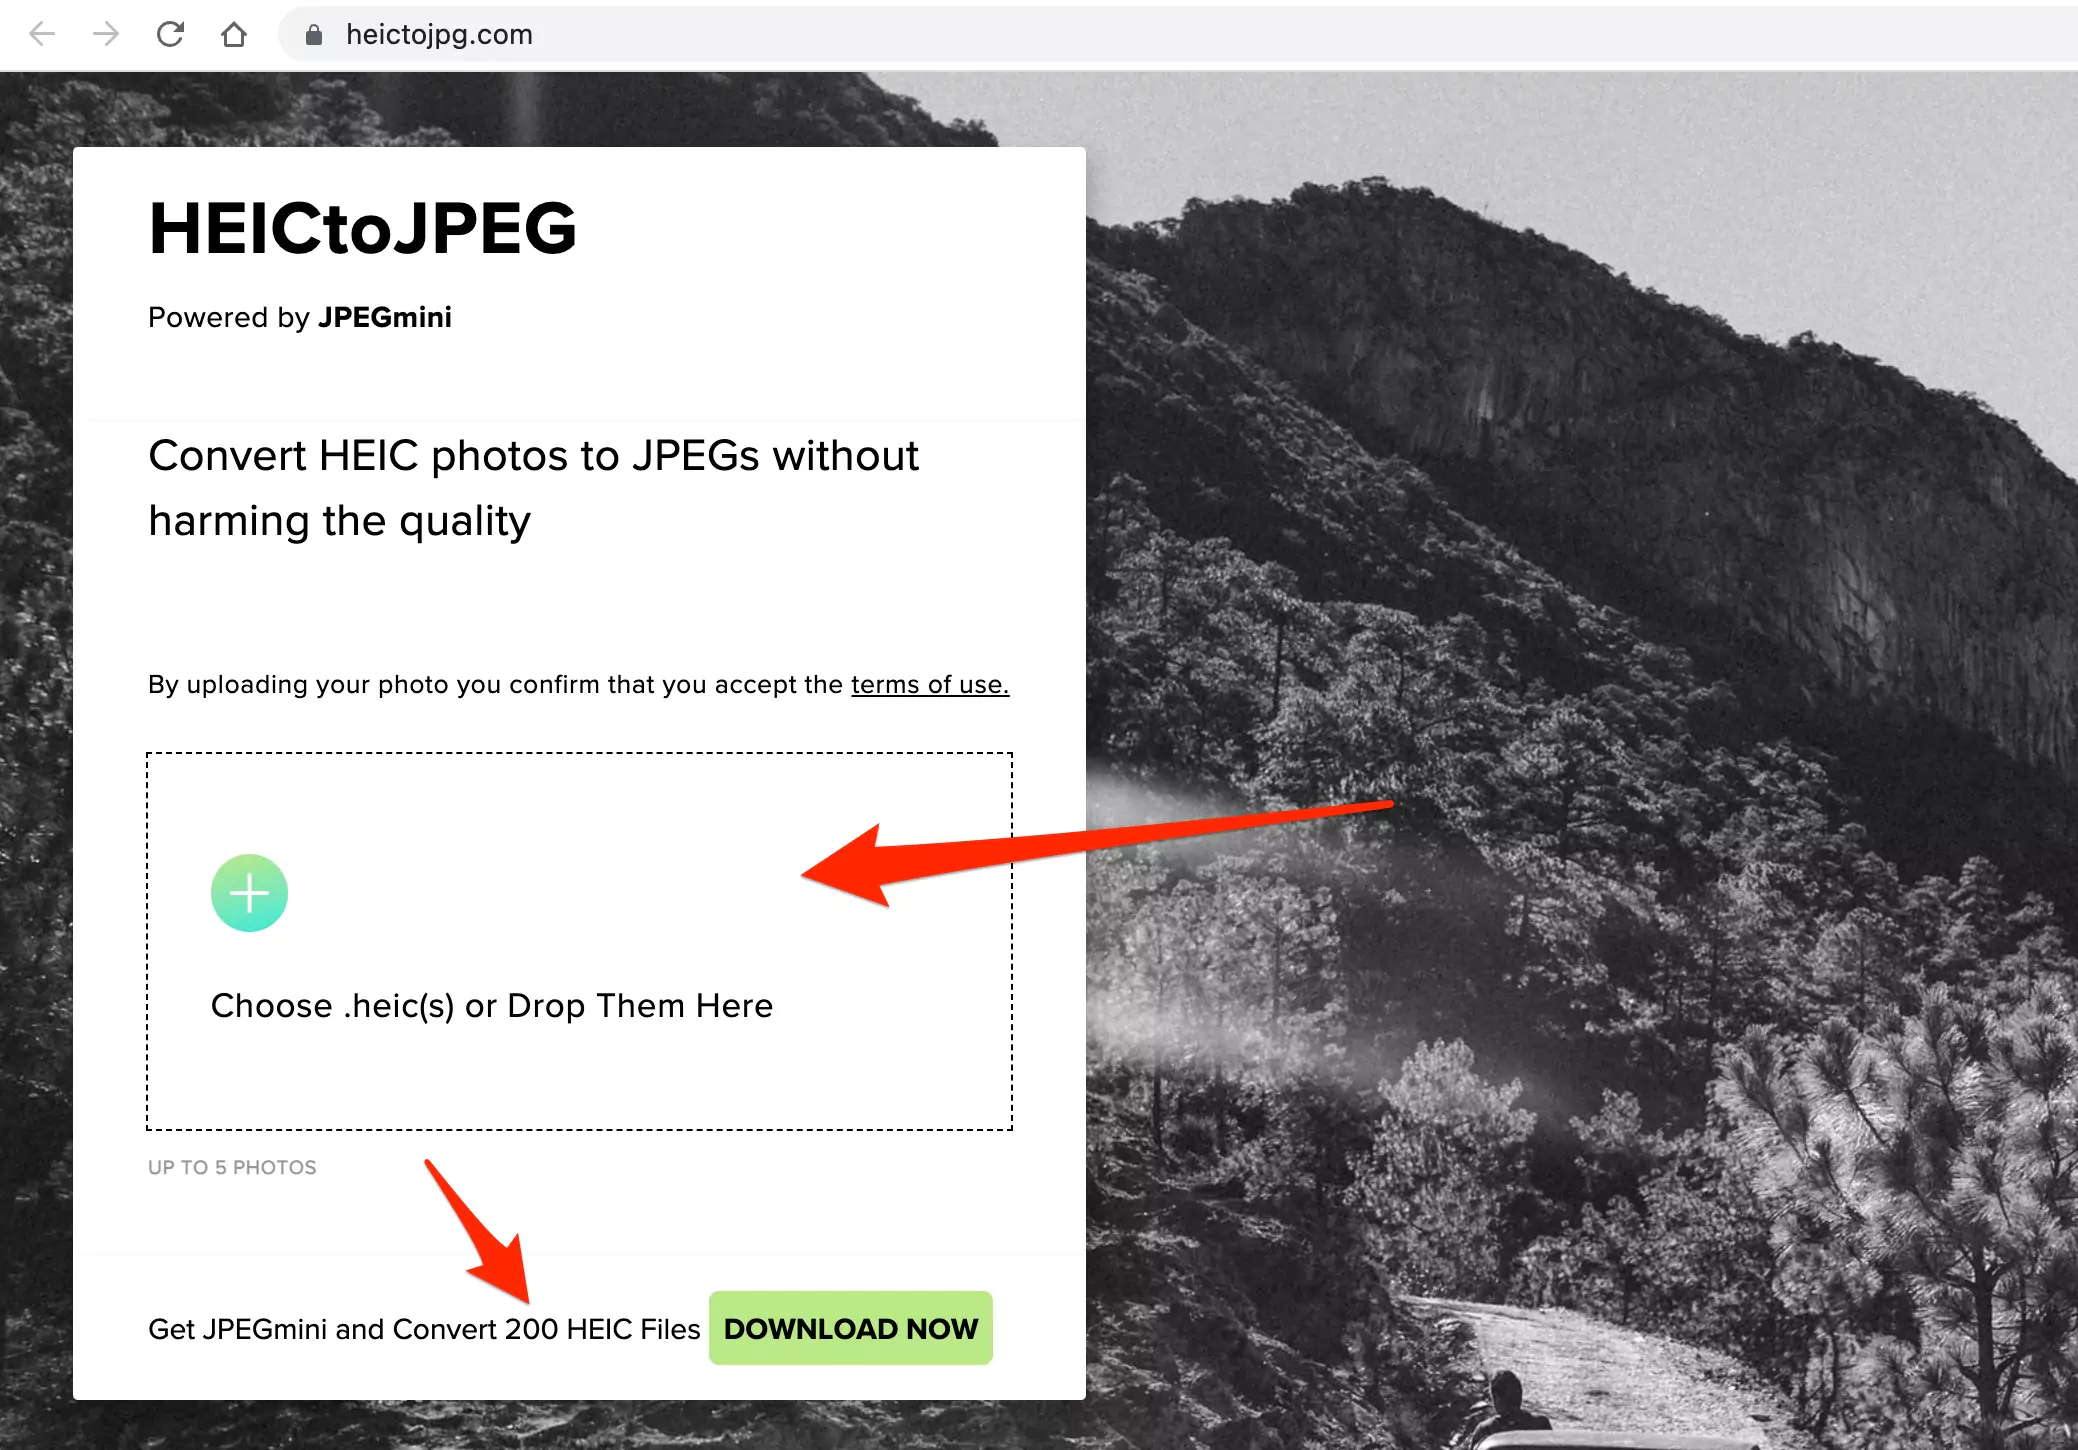 convert-up-to-5-photos-at-once-from-heic-to-jpeg-on-mac-and-windows-online